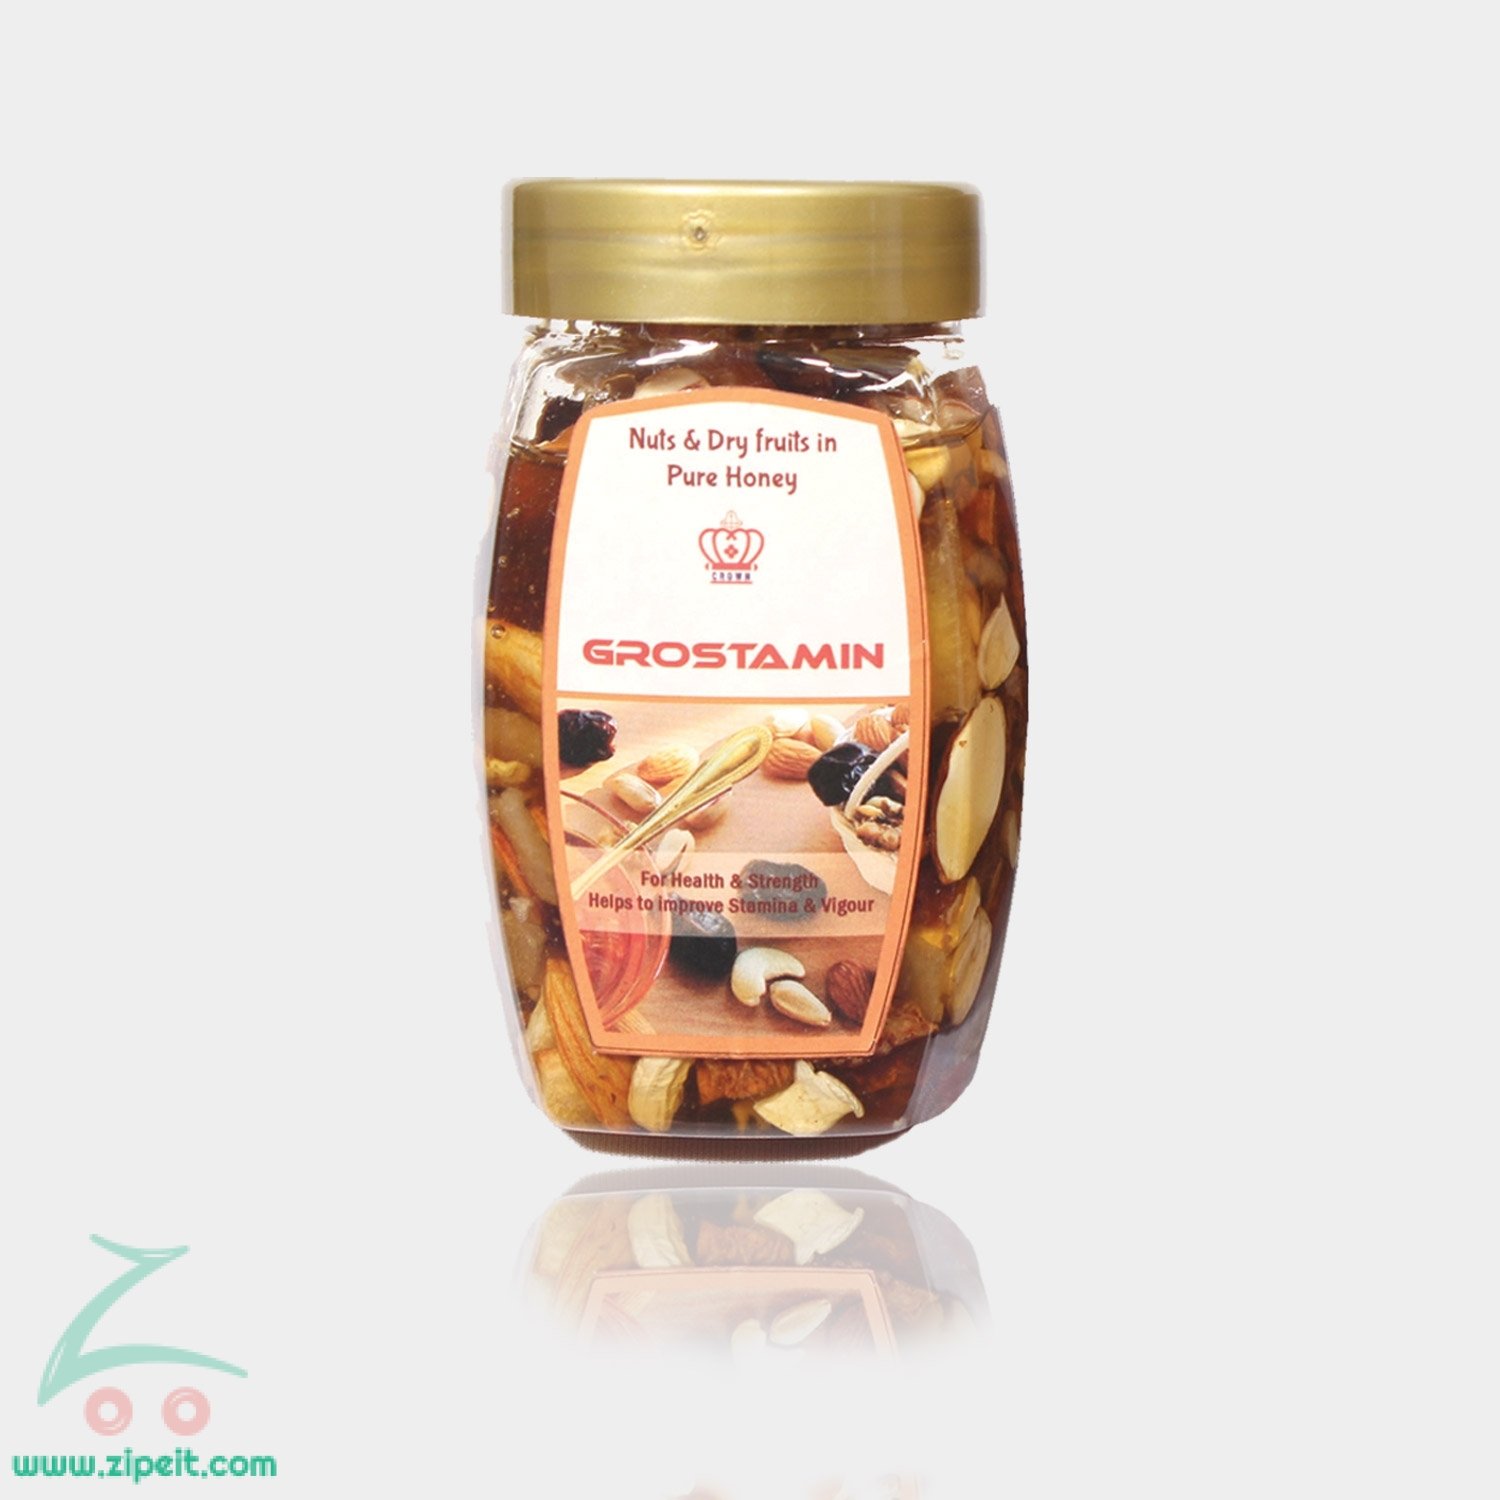 Crown Grostamin (Nuts & Dry Fruits in Honey) - 250g